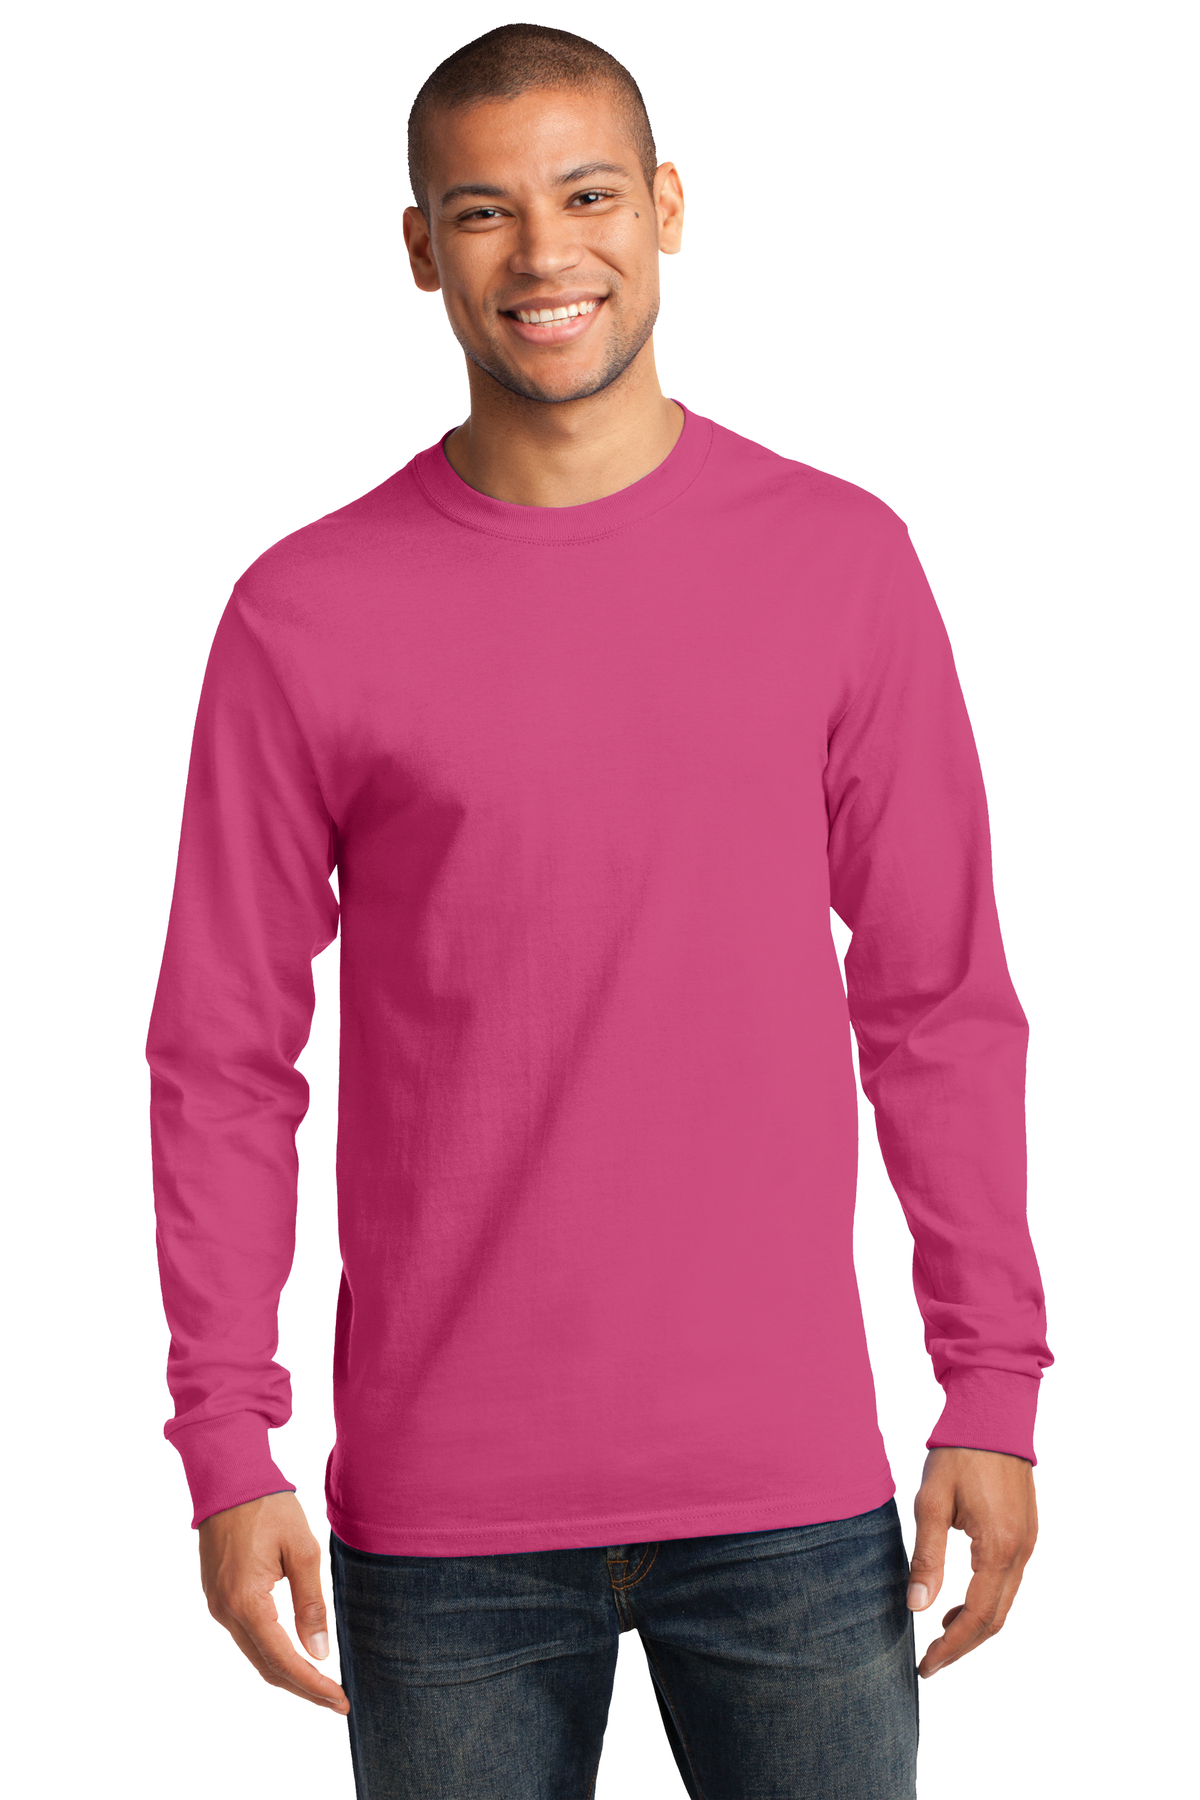 Port & Company Printed Men's Long Sleeve Essential Tee | T-Shirts ...